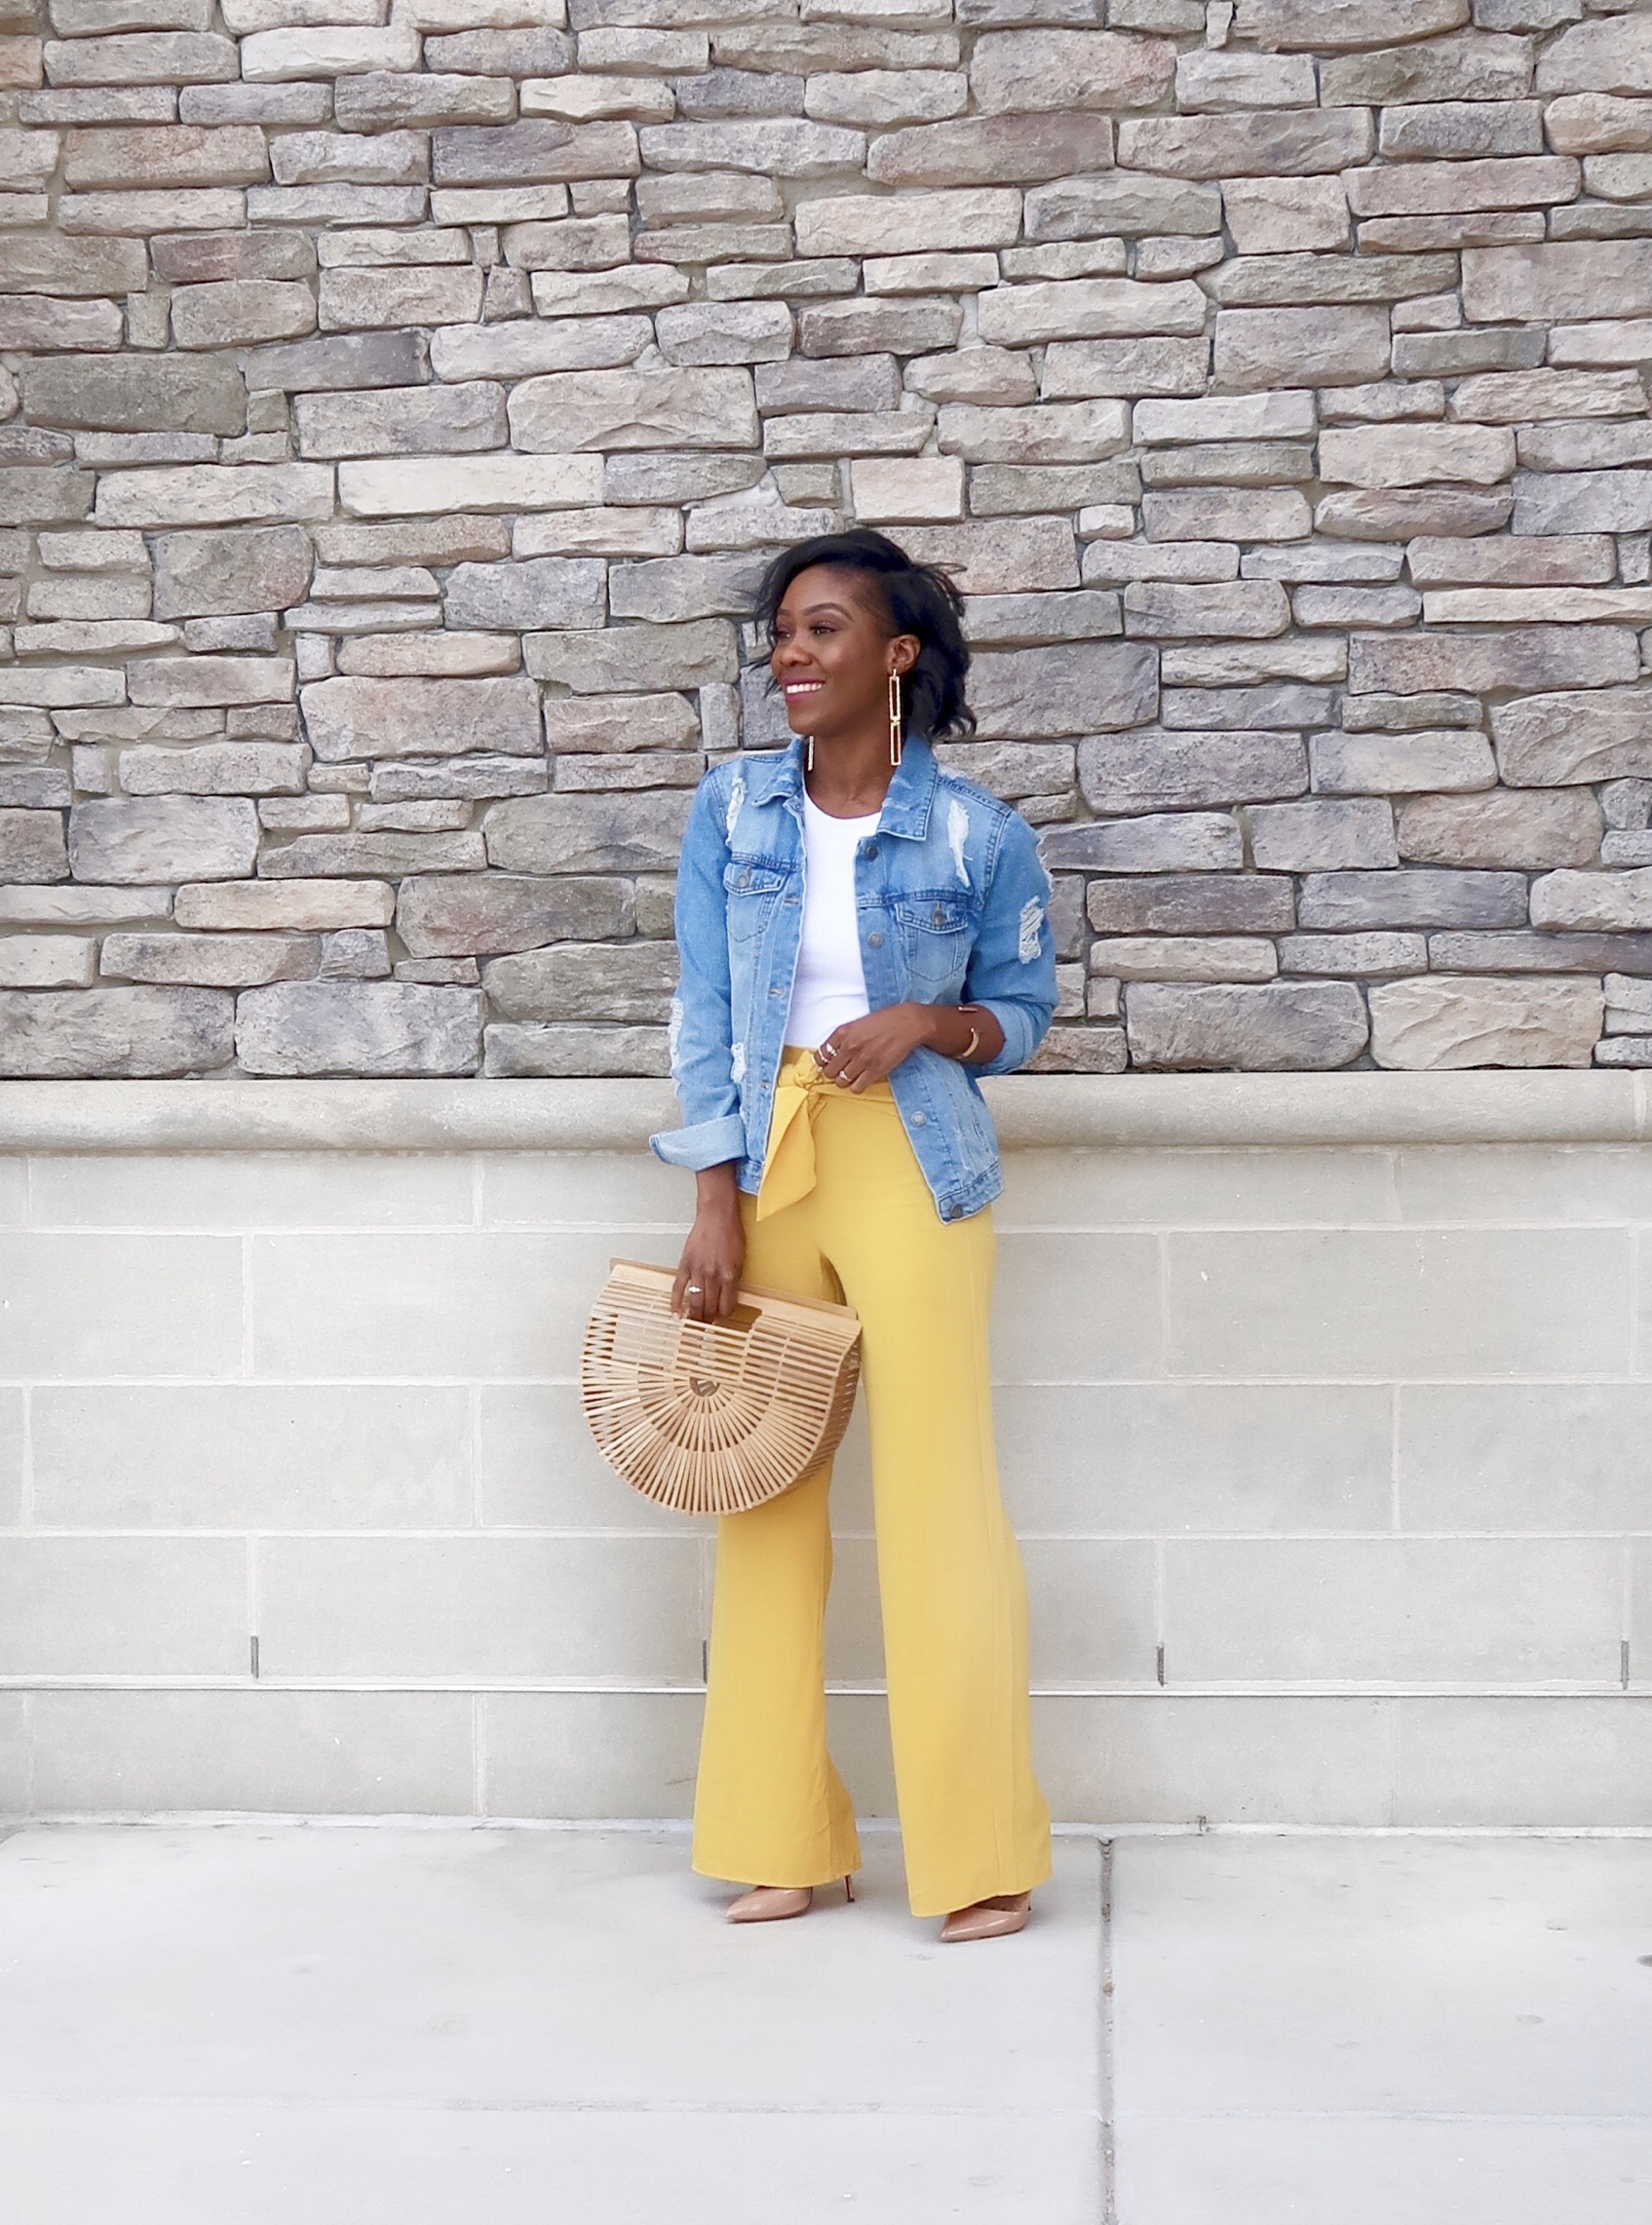 How to style denim jacket for work, You can recreate this style with pieces from your closet.